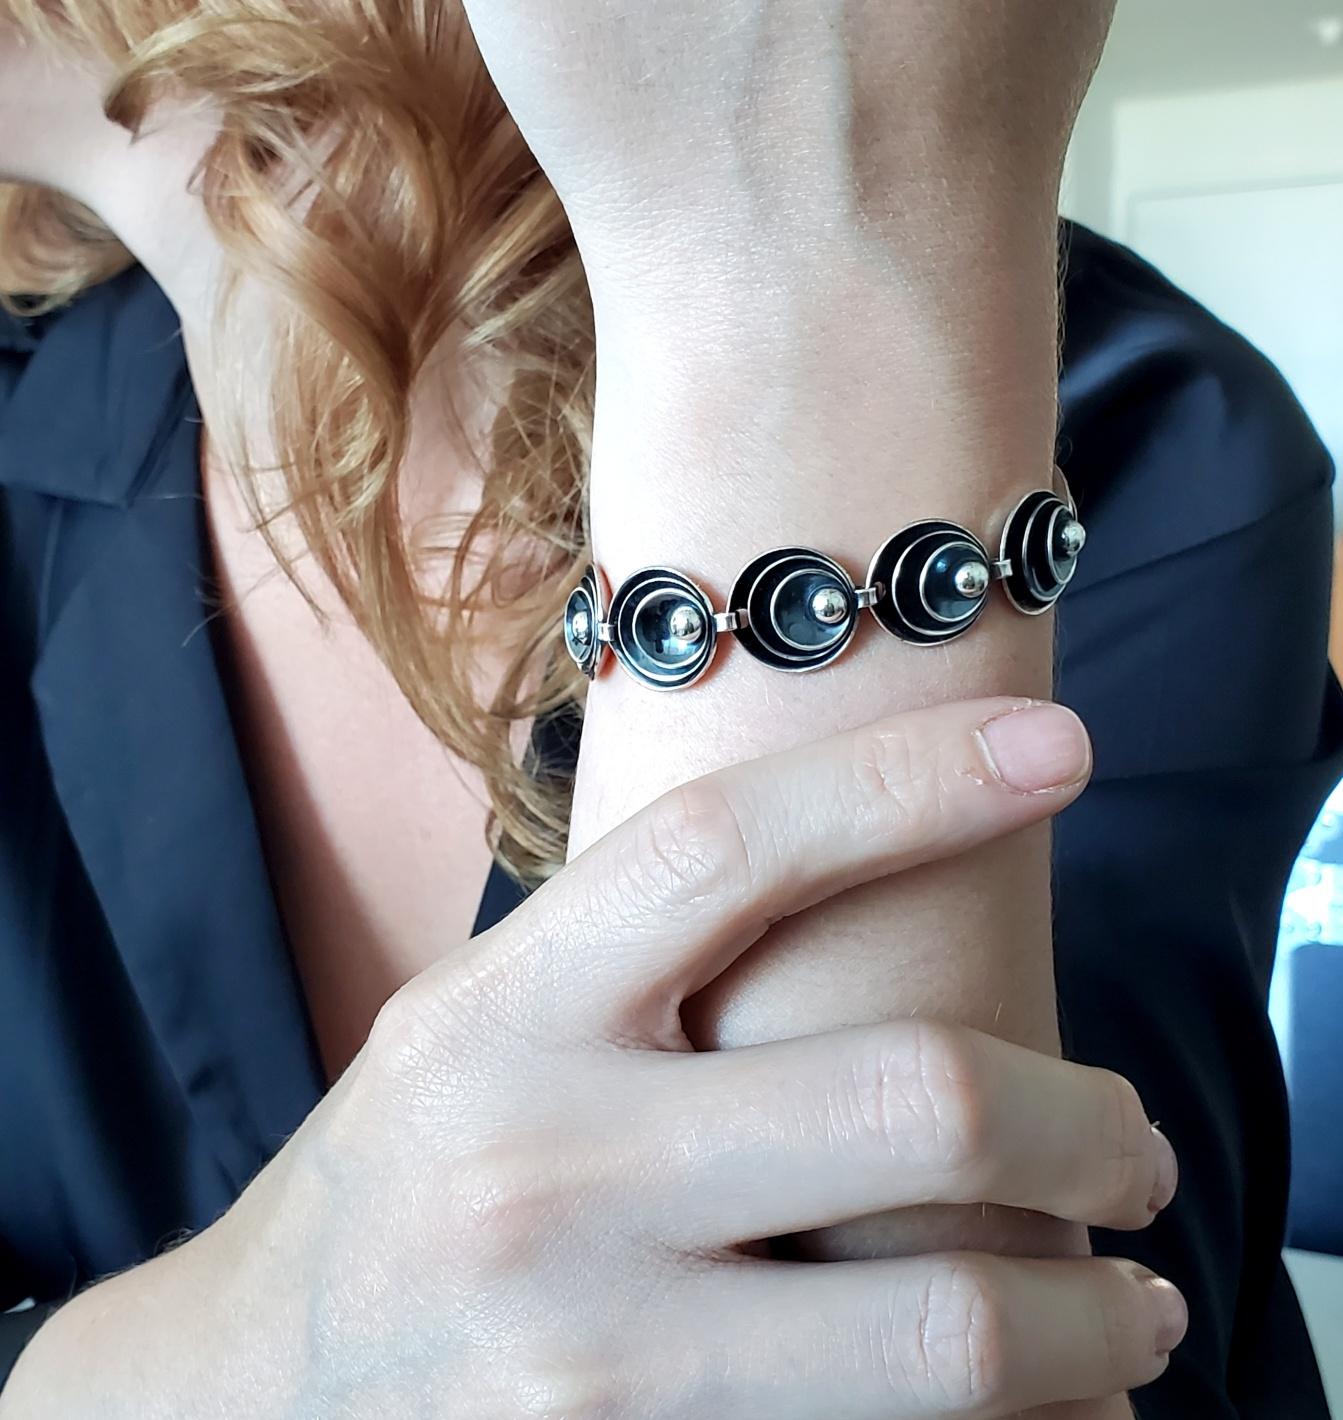 An Op Art bracelet designed by Hermann Siersbol.

An easy to wear everyday bracelet, created in Copenhagen Denmark by Hermann Siersbol, back in the 1960s. It was crafted with optical art patterns in solid sterling silver .925/.999 with polished and